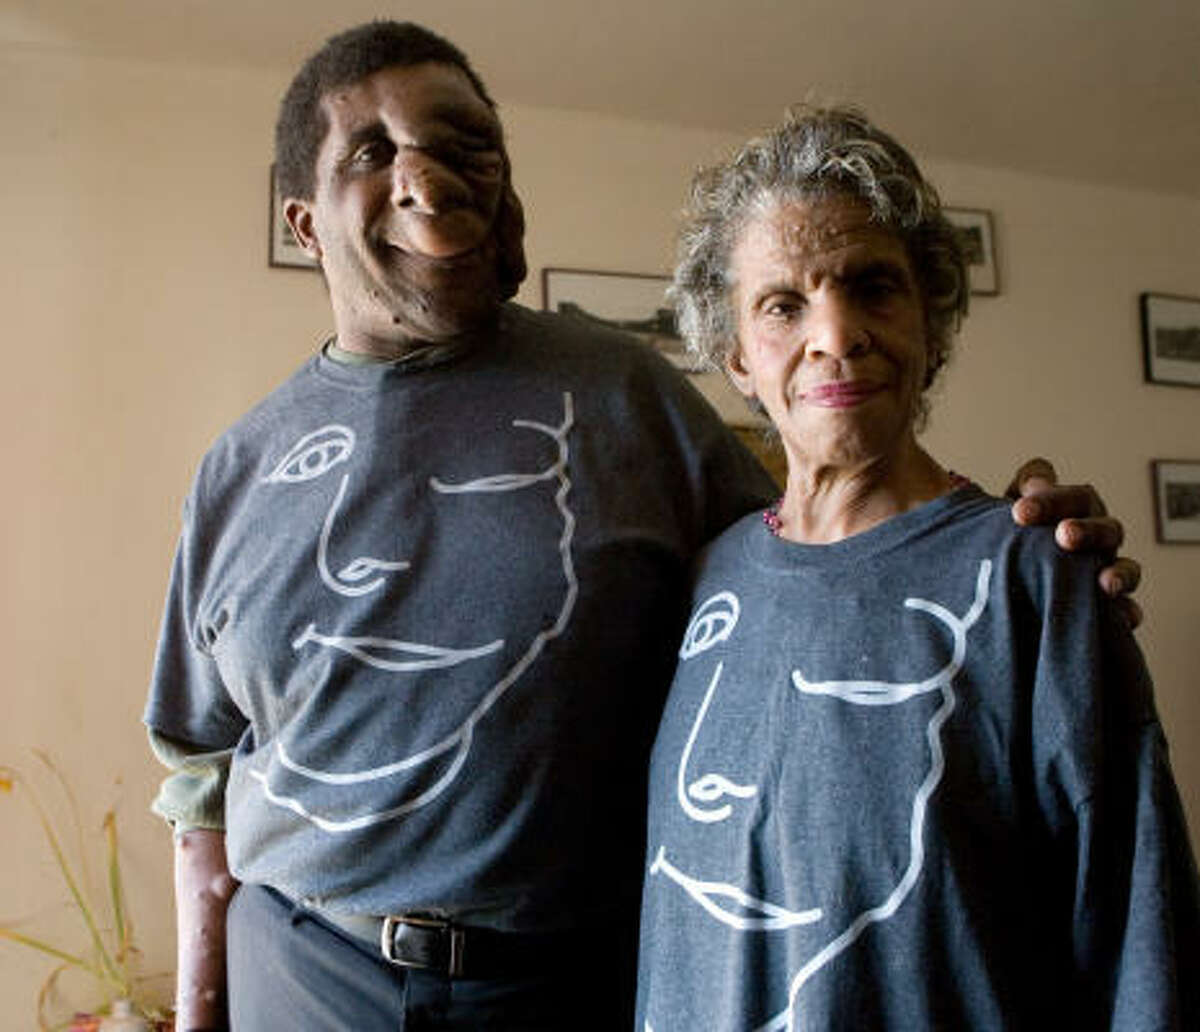 Reggie Bibbs and his mother, Dorothy Bibbs, wear their their "Just Ask!" shirts. Reggie Bibbs received a reward for his "Just Ask!" campaign.